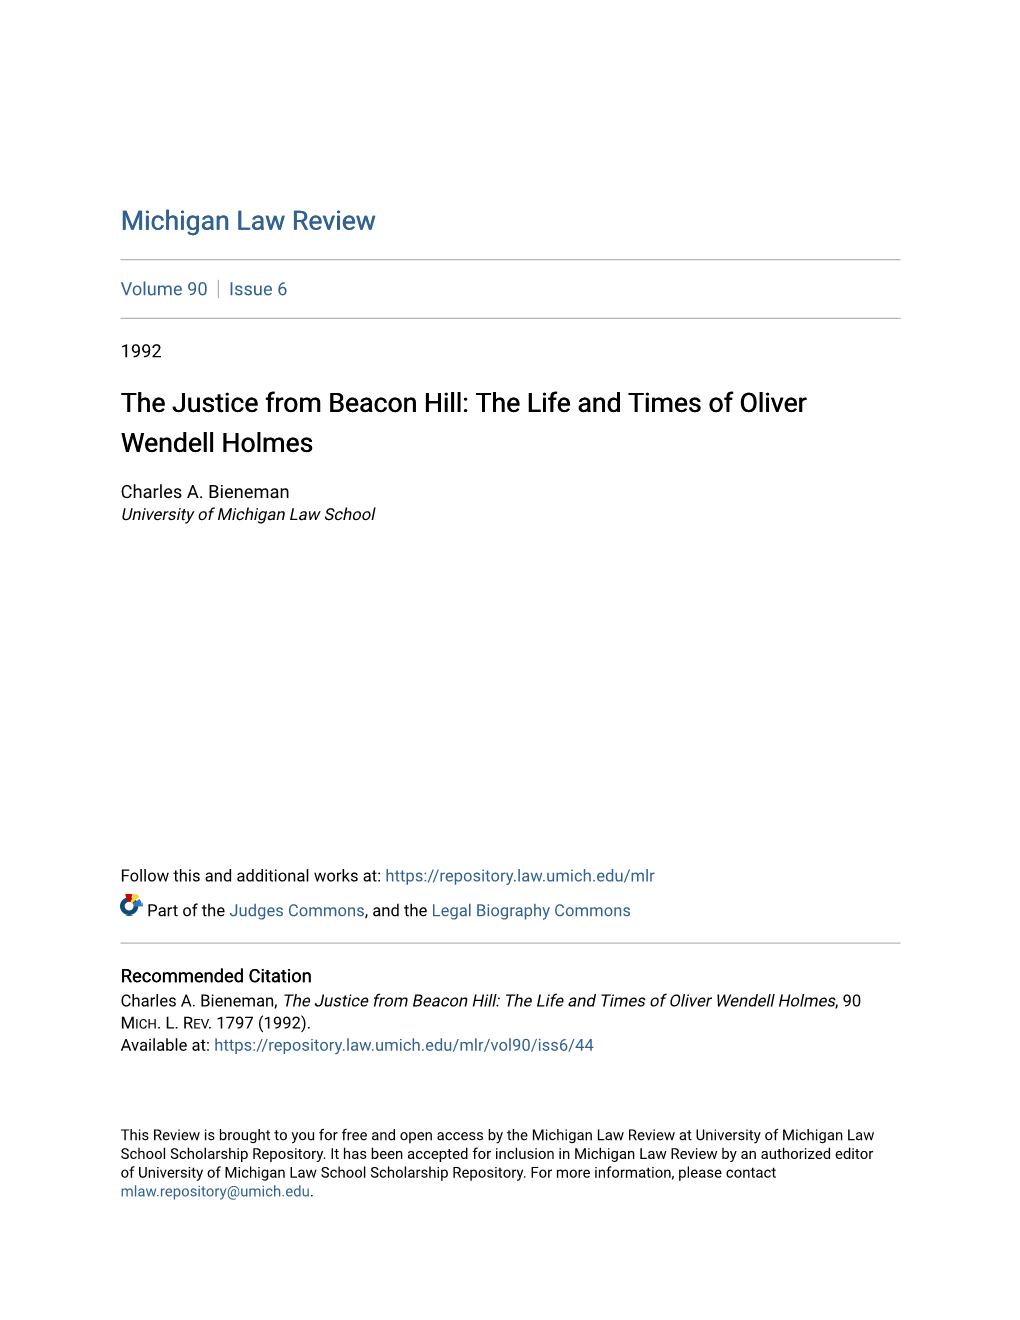 The Justice from Beacon Hill: the Life and Times of Oliver Wendell Holmes